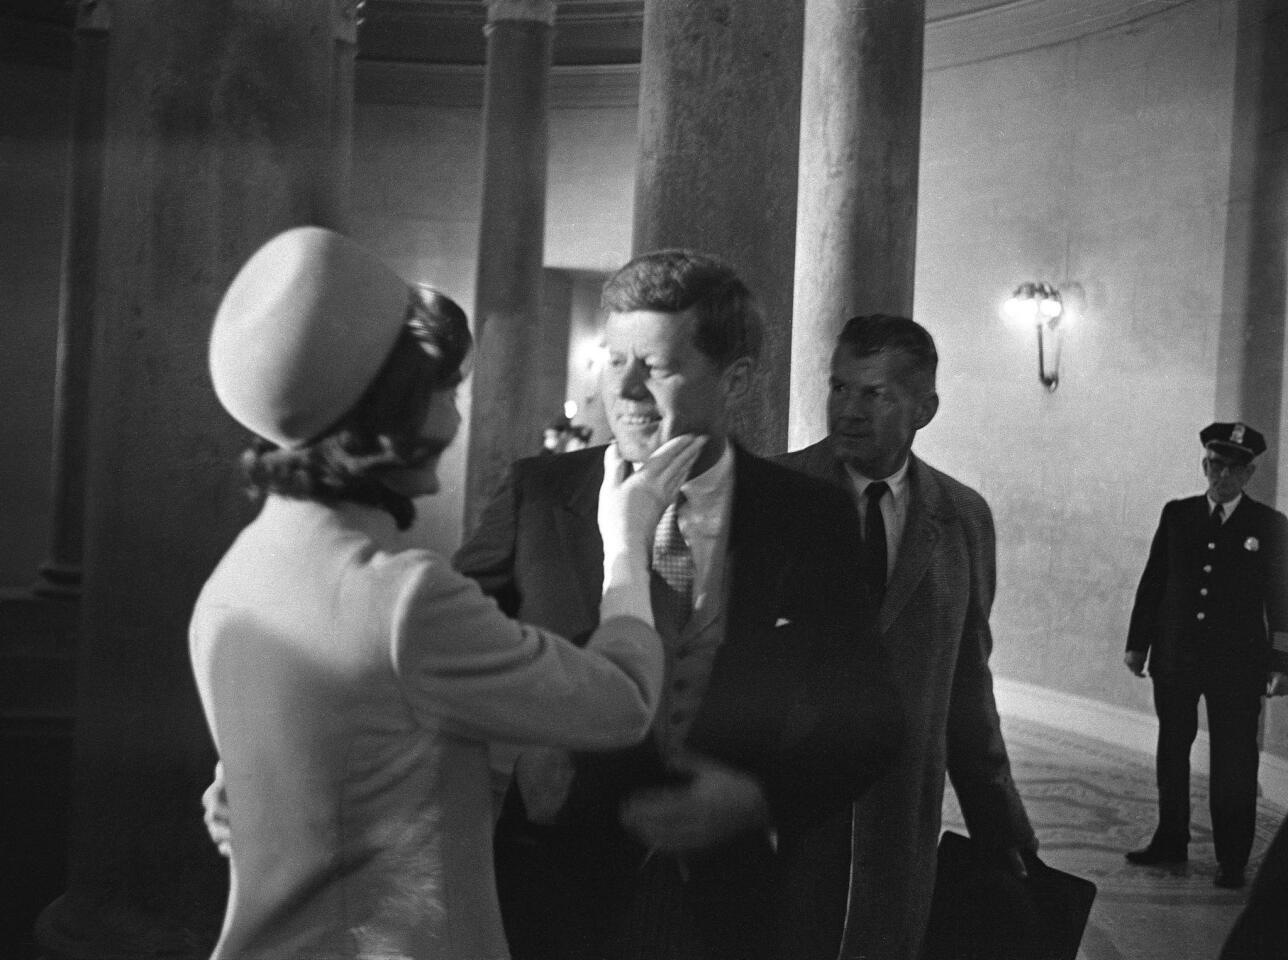 Jacqueline Kennedy, left, caresses her husband's face after he was sworn in as president, the youngest ever elected, on Jan. 21, 1961.